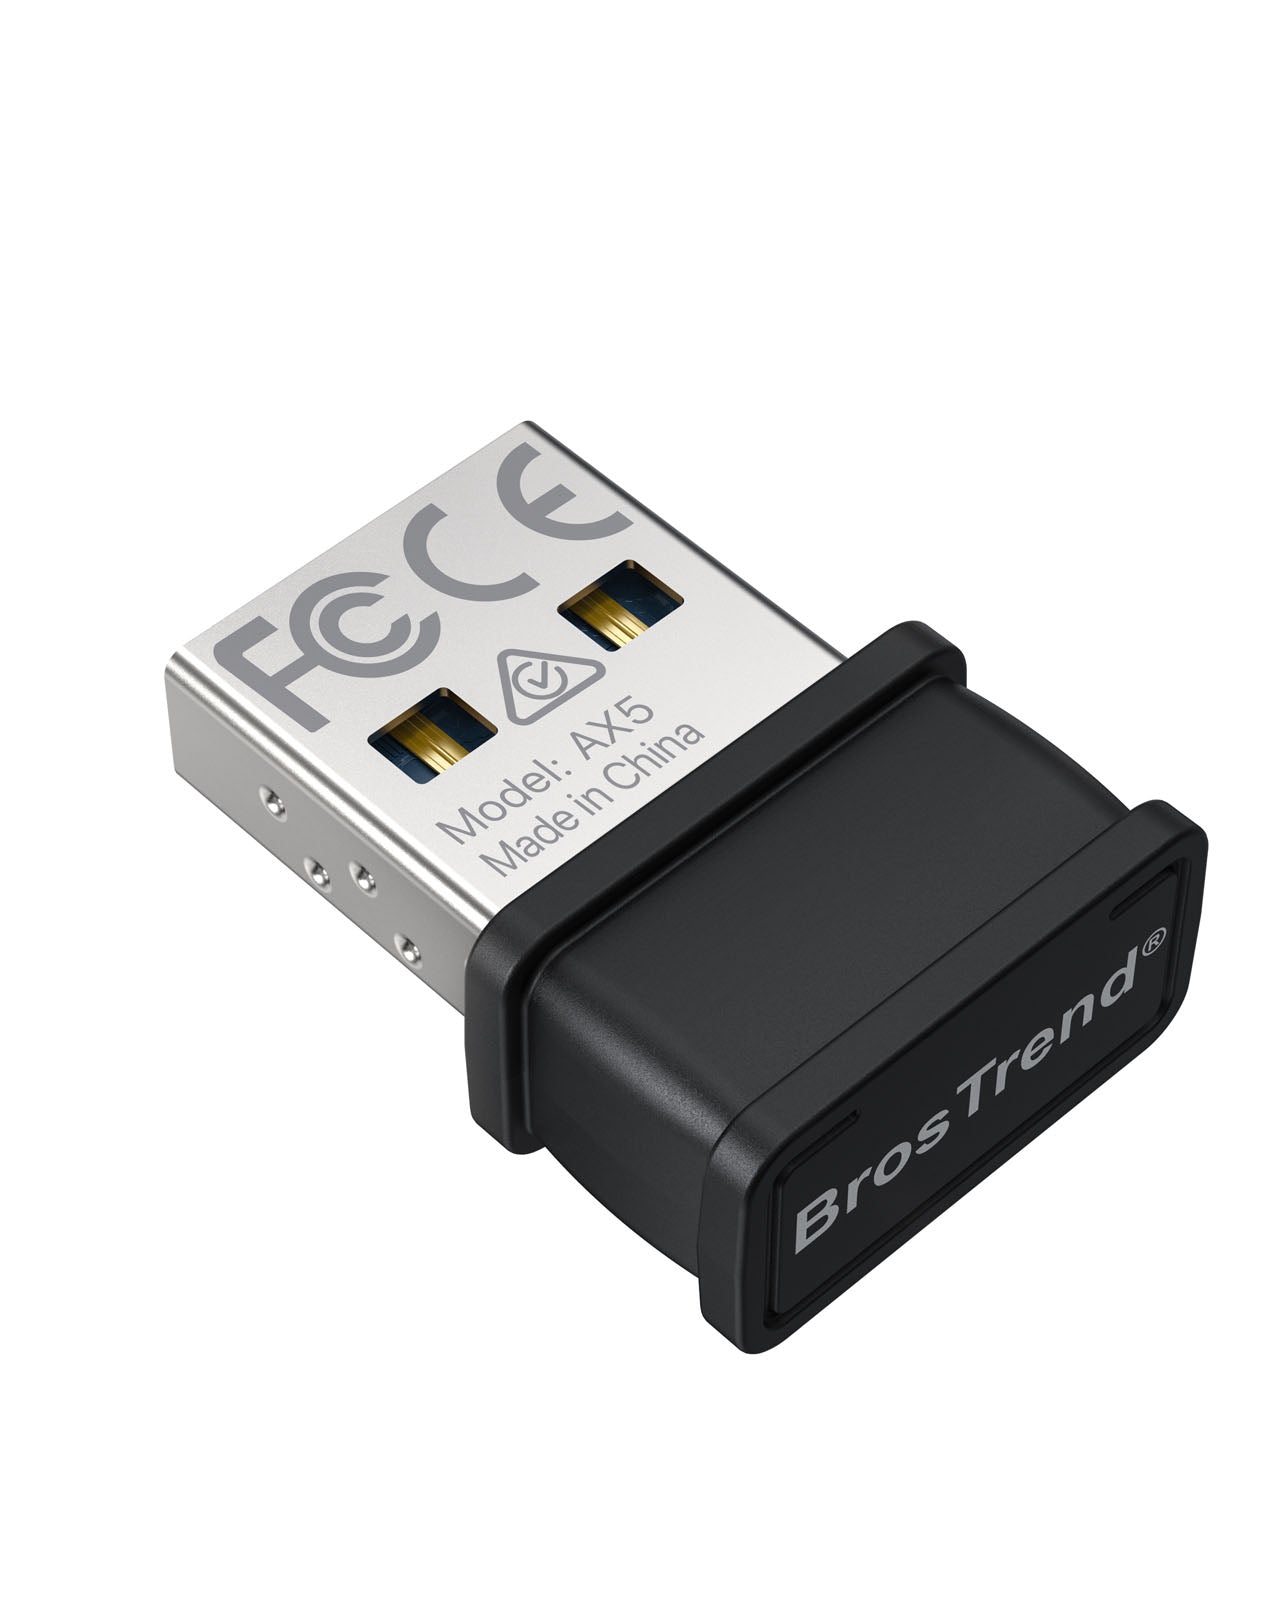 BrosTrend AX300 Linux WiFi 6 USB Adapter Is Compatible with Multiple Debian Based Distros Comes with Nano Size Supports 2.4GHz Wireless Band Only